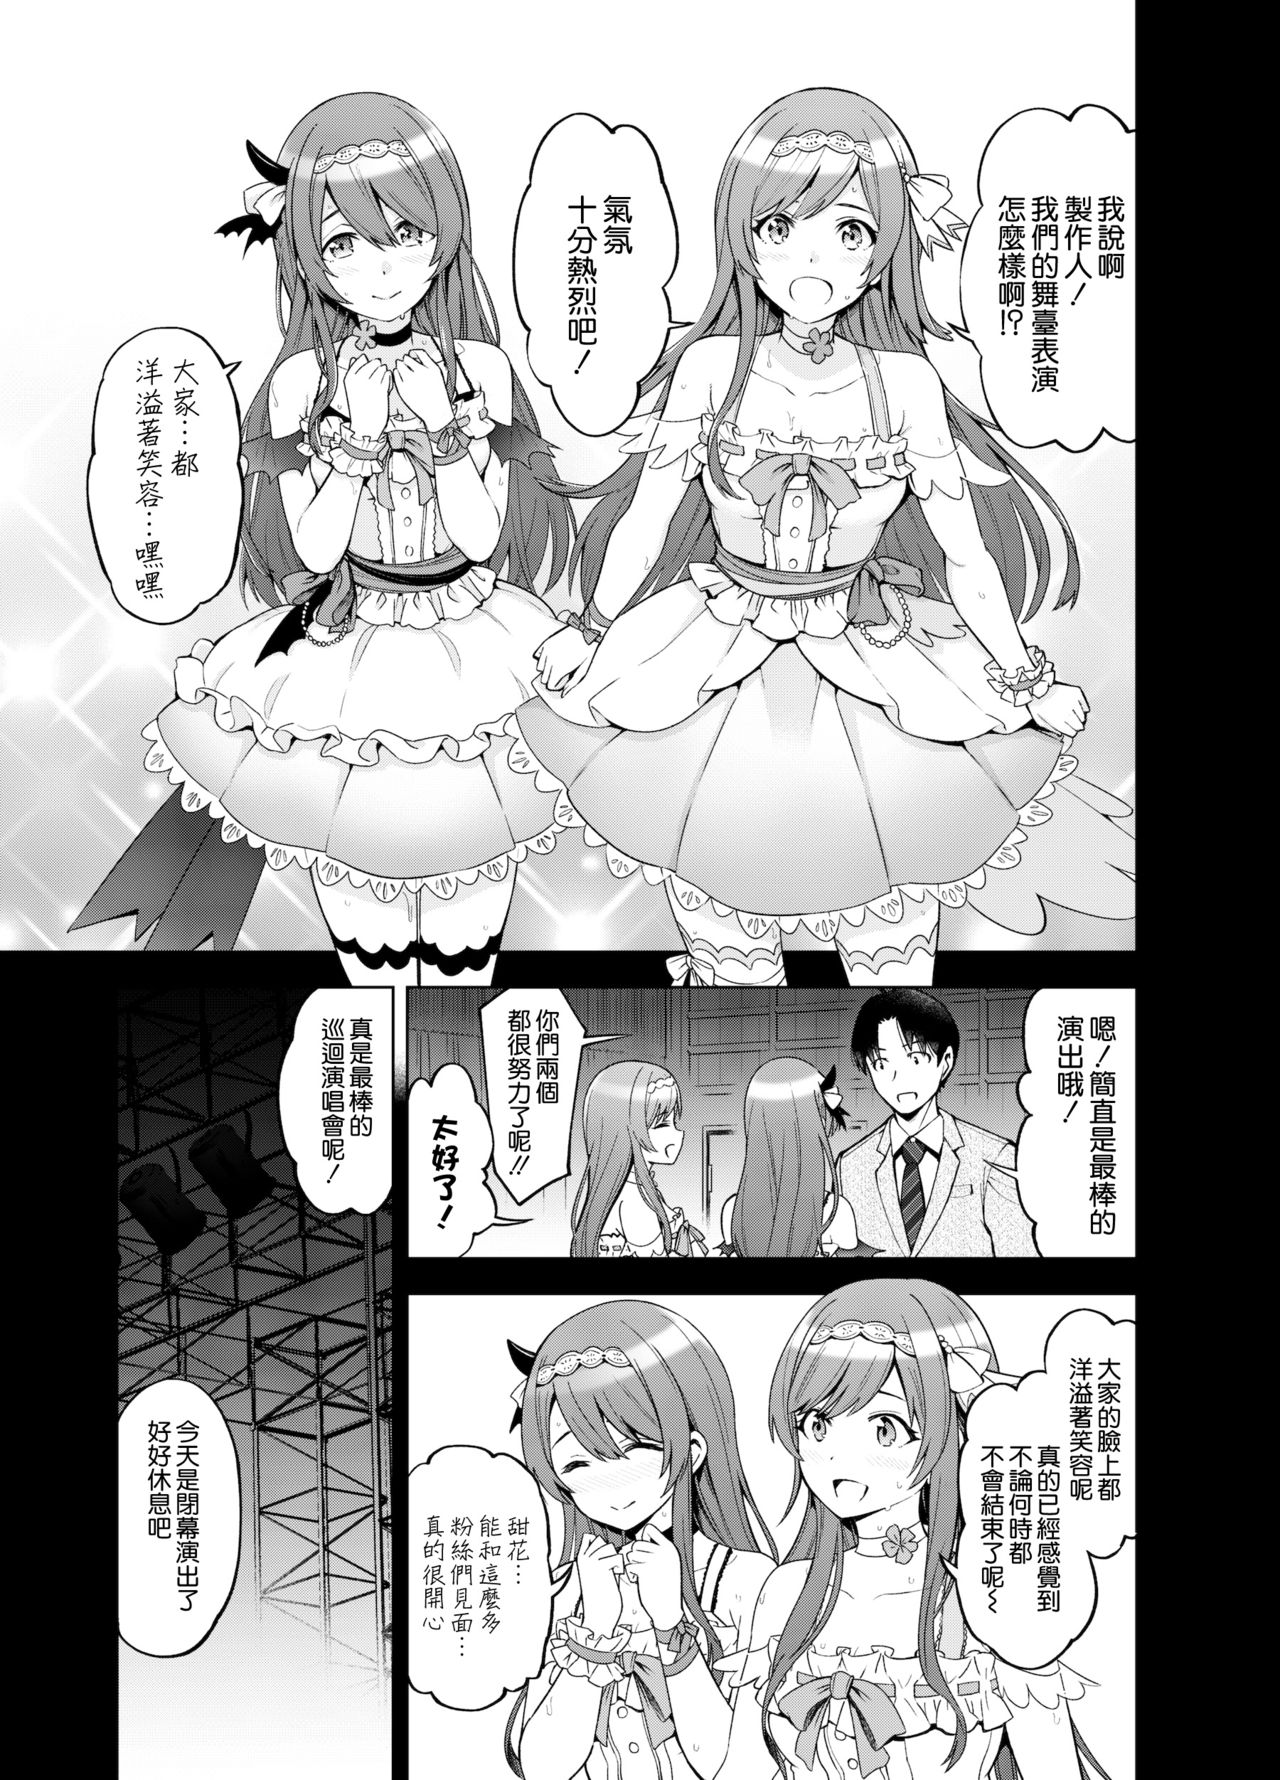 [SMUGGLER (Kazuwo Daisuke)] Late Night Blooming (THE iDOLM@STER: Shiny Colors) [Chinese] [空気系☆漢化] [Digital] page 5 full